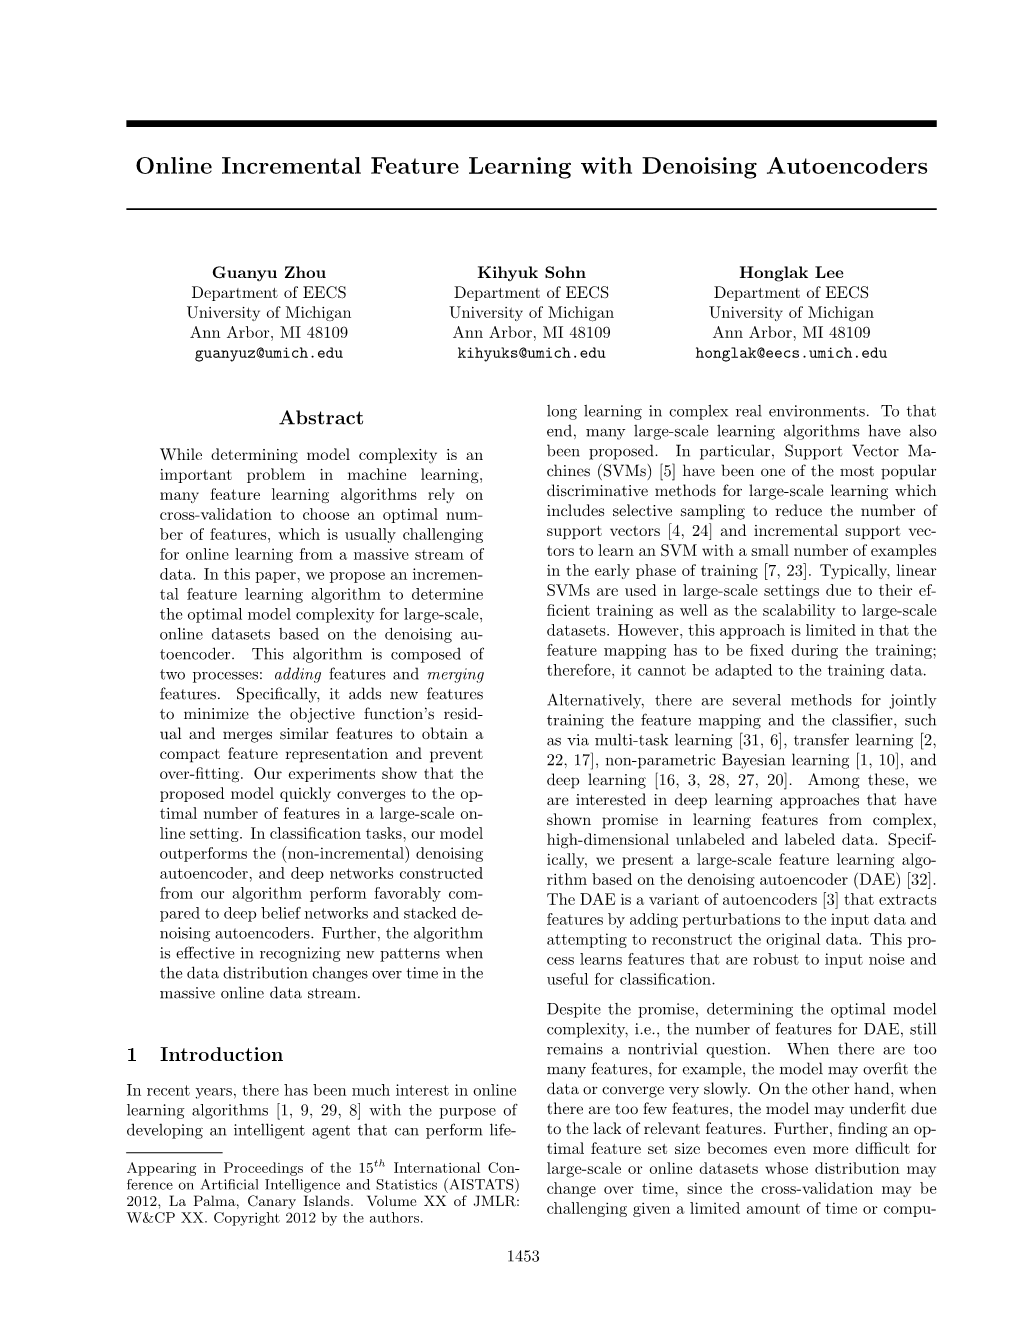 Online Incremental Feature Learning with Denoising Autoencoders